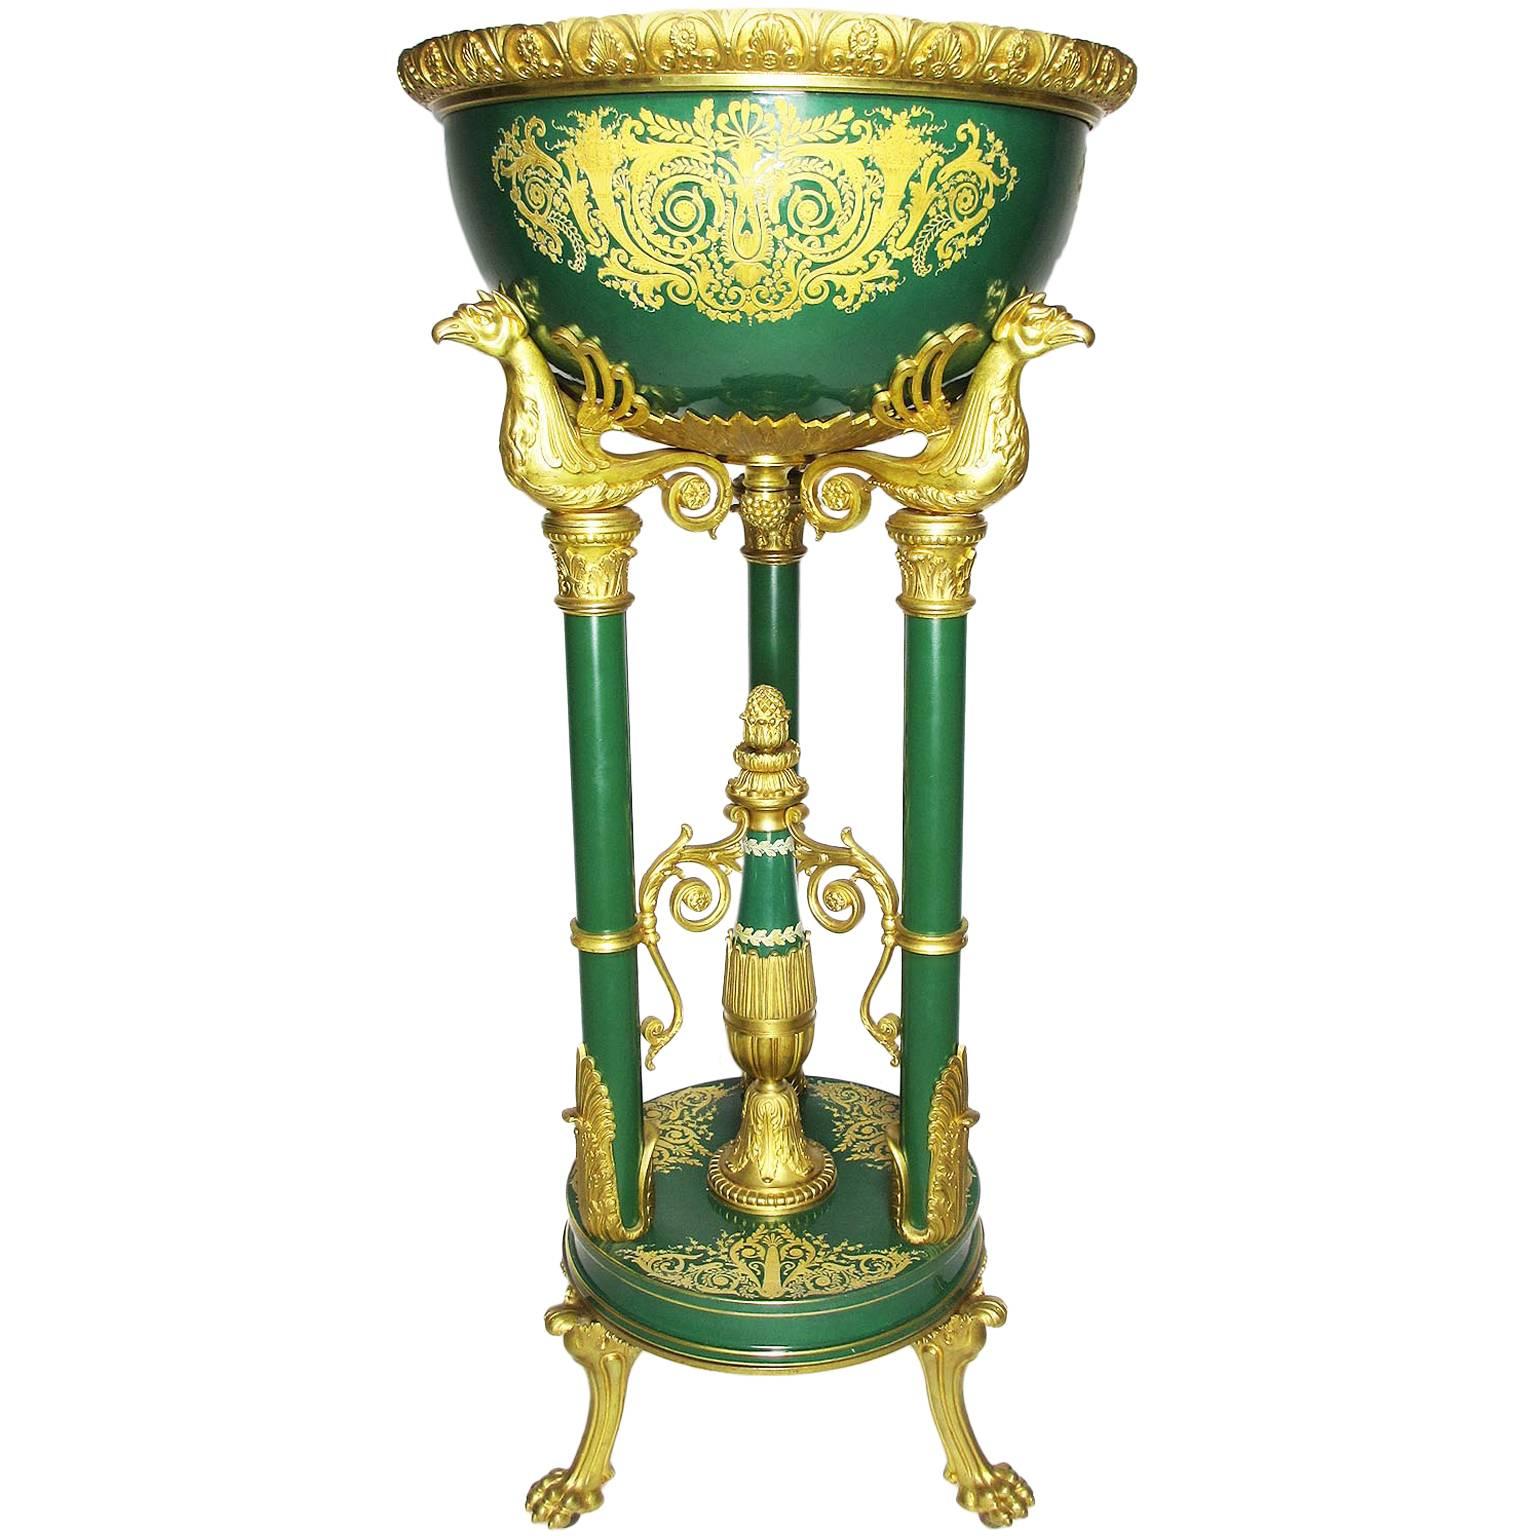 Fine French 19th Century Napoleon III Gilt Bronze-Mounted Porcelain Planter For Sale